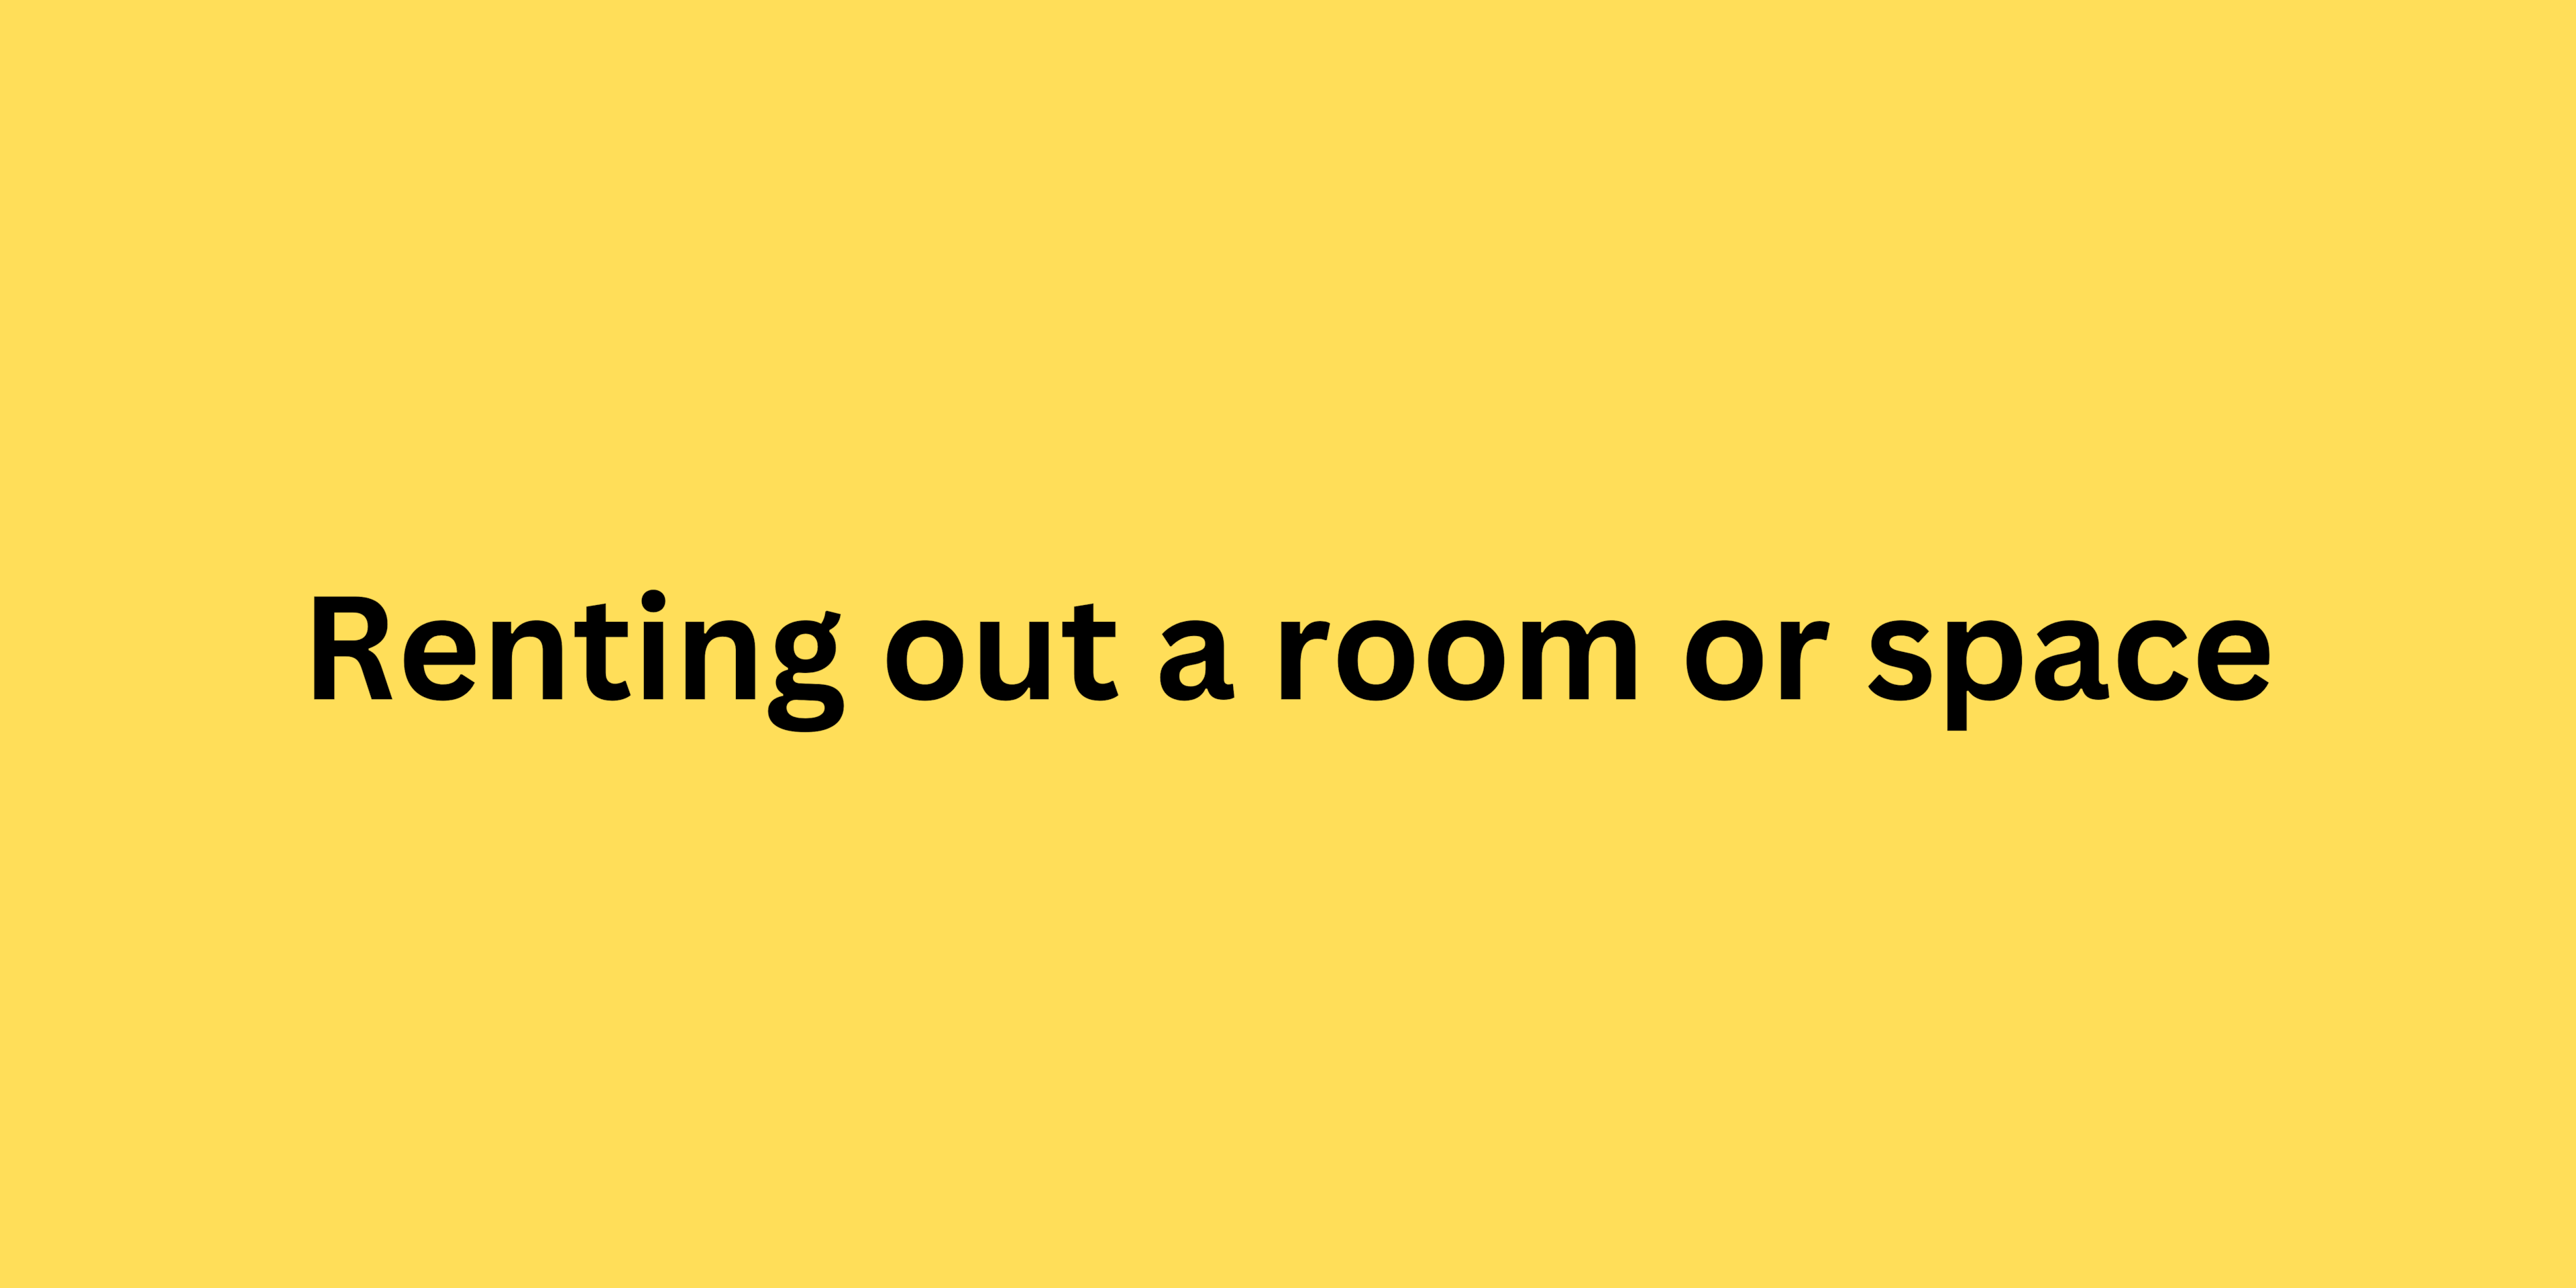 Renting out a room or space